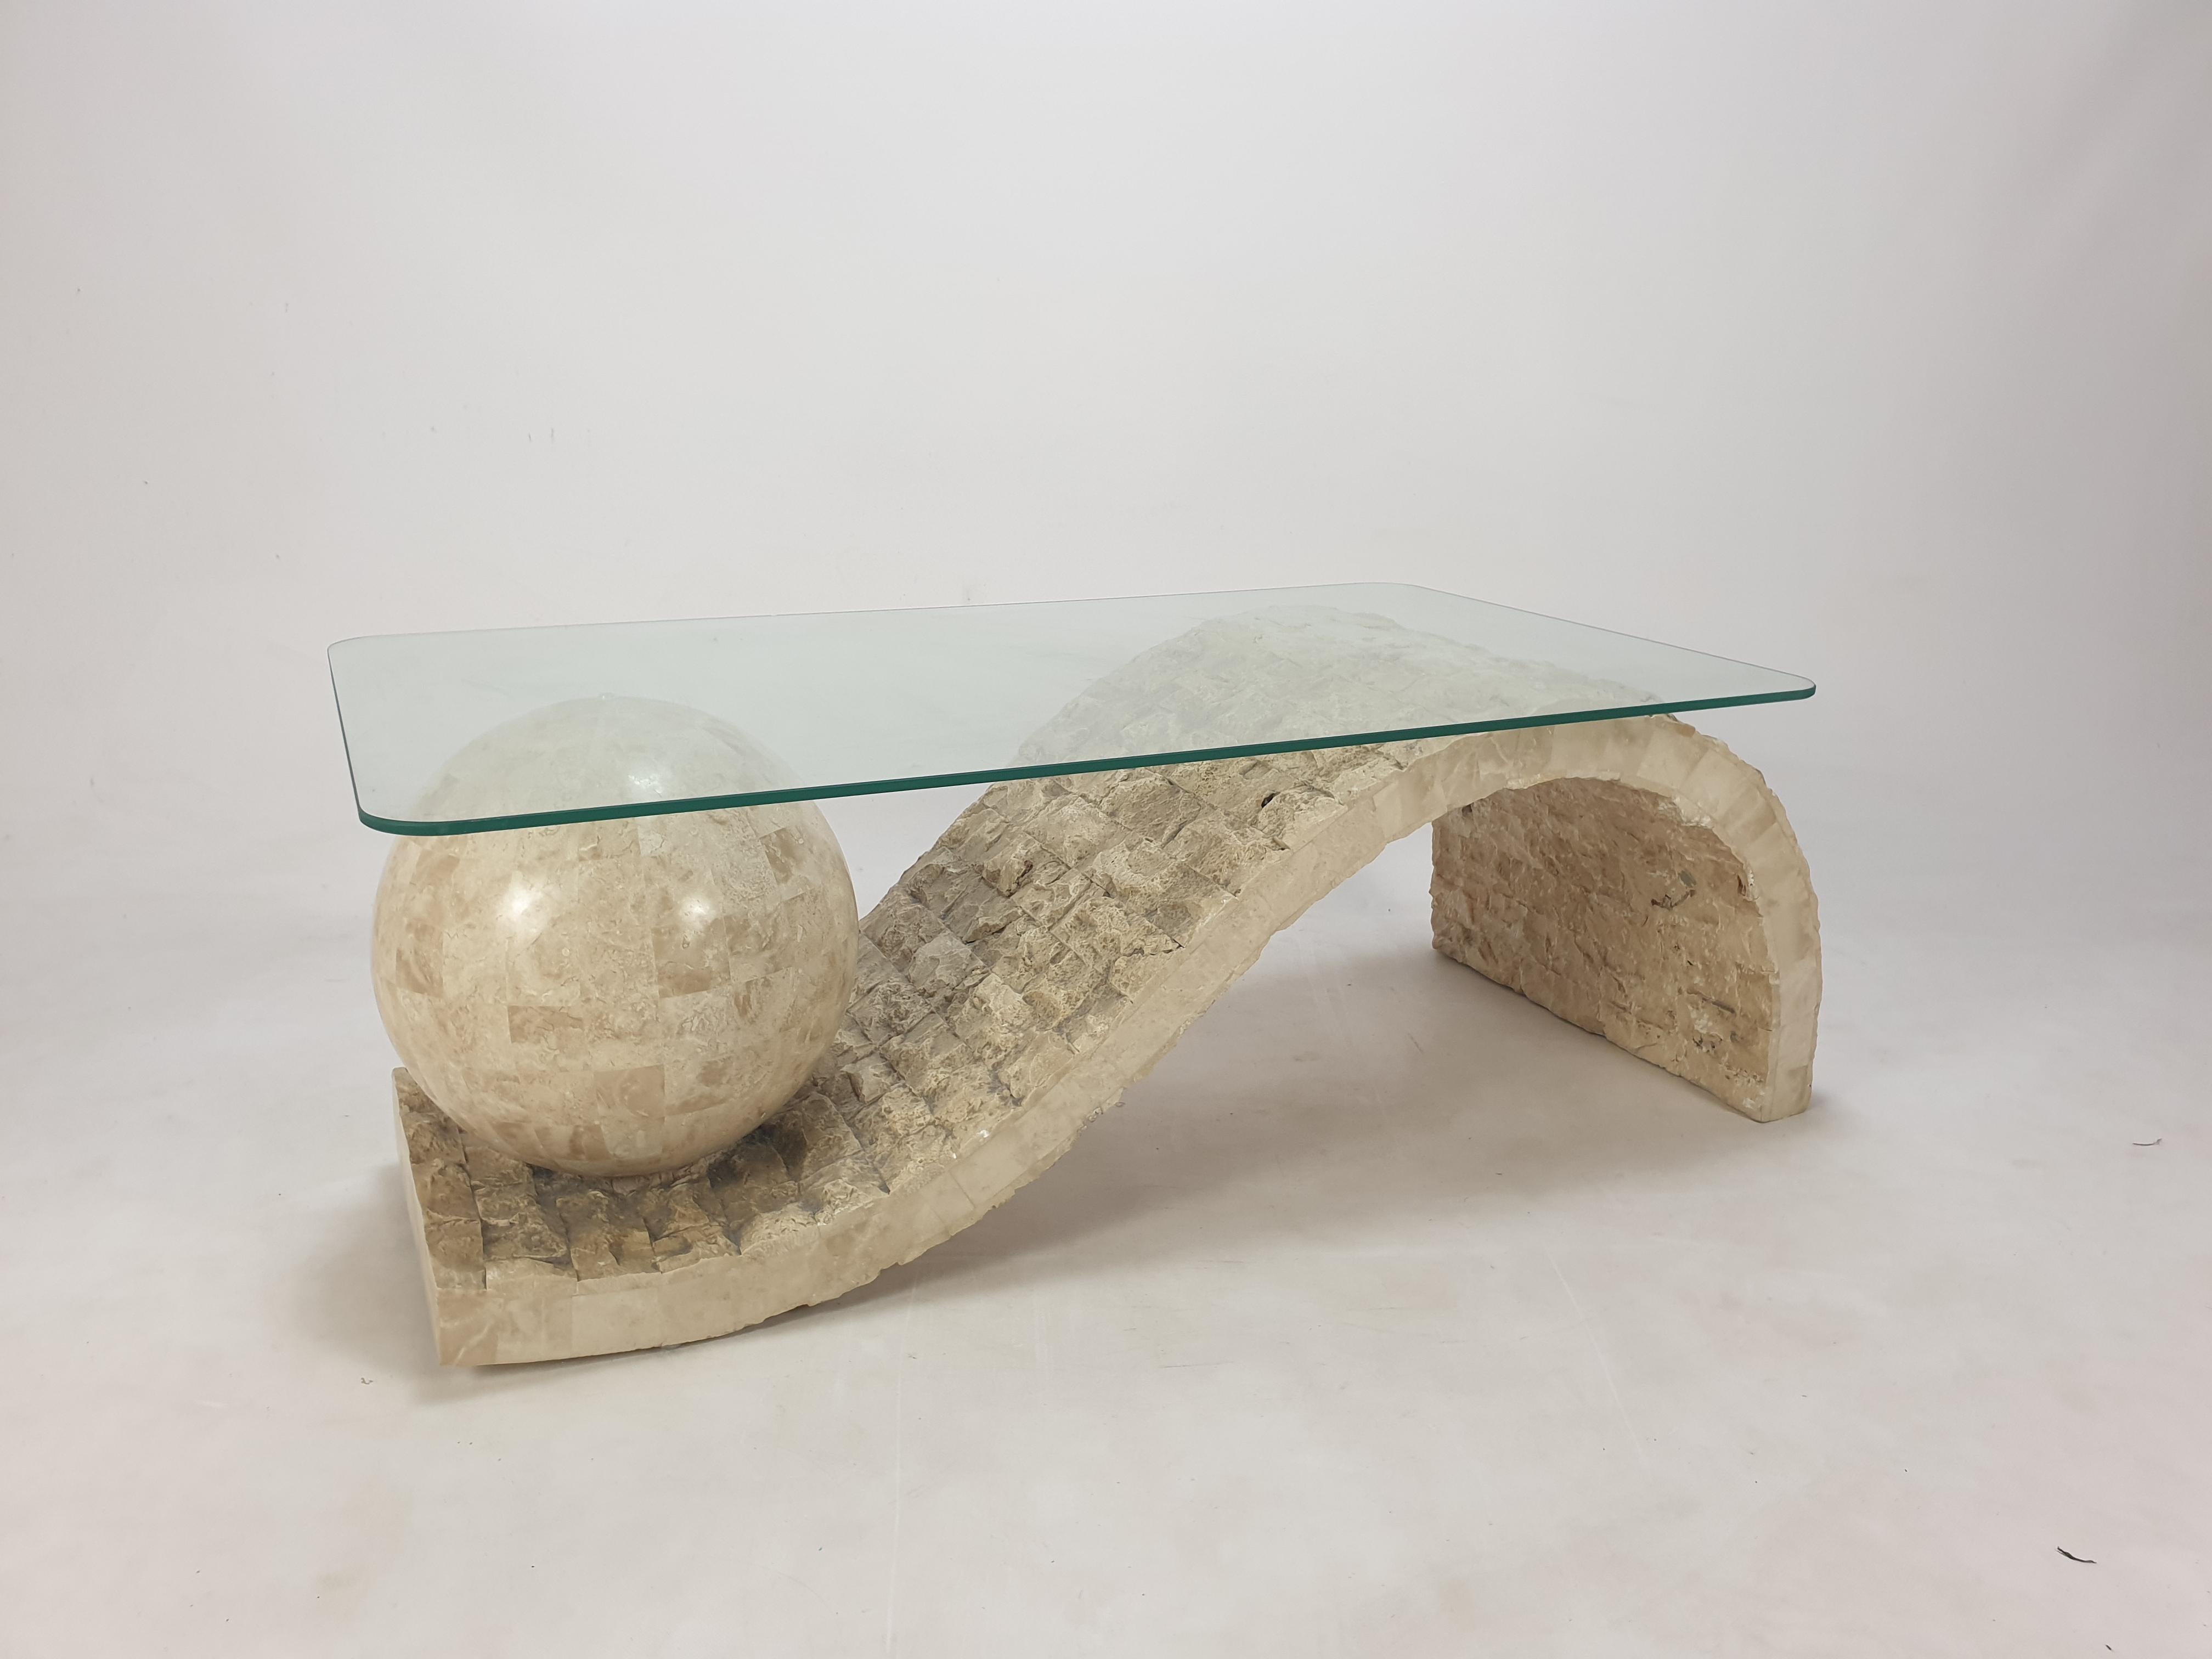 Very nice coffee or side table by Magnussen Ponte, 1980's.

The stunning table base is made of Mactan stone or Fossil Stone.
 